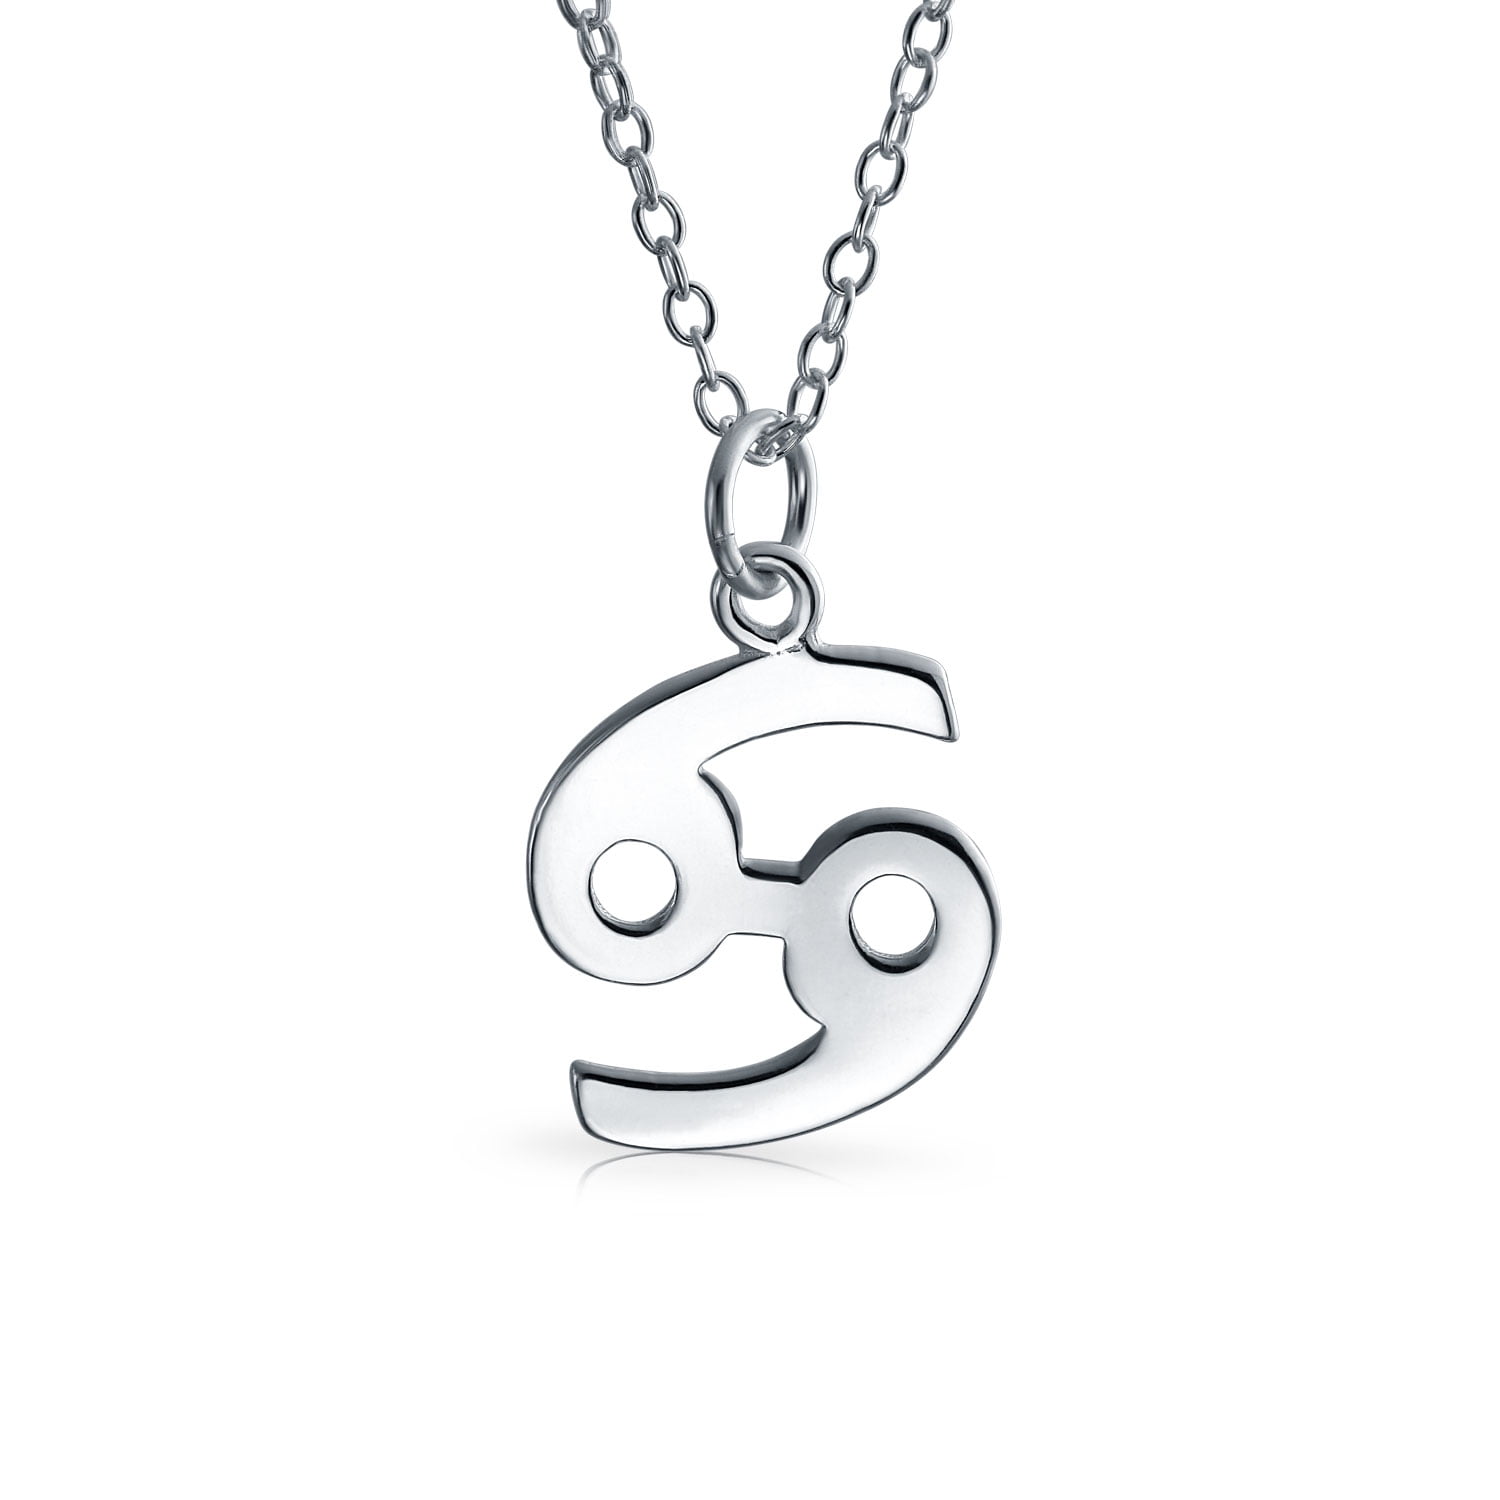 Details about   The Letter "W" 925 Sterling Silver Necklace w